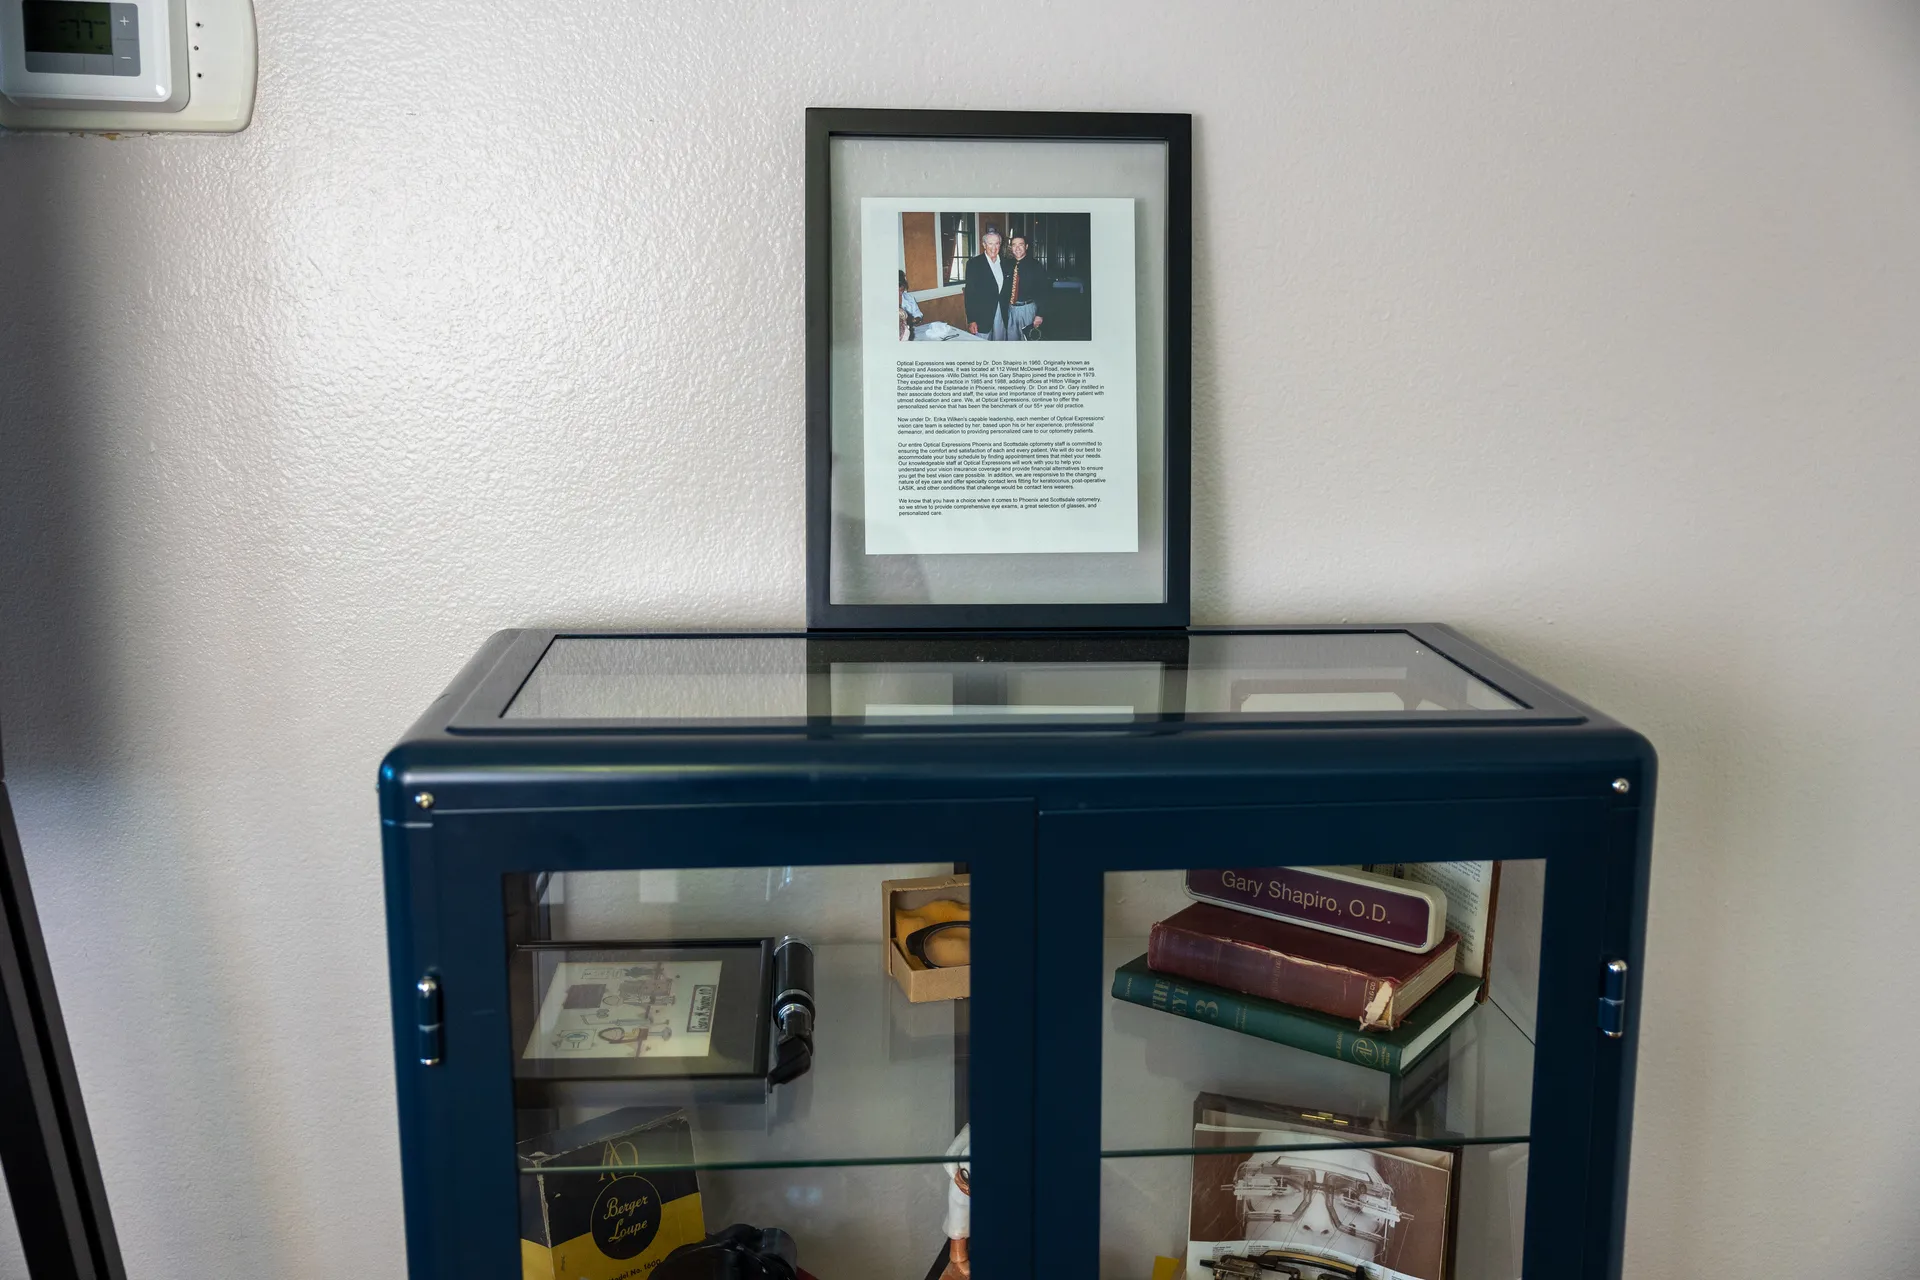 display case with books and framed documents